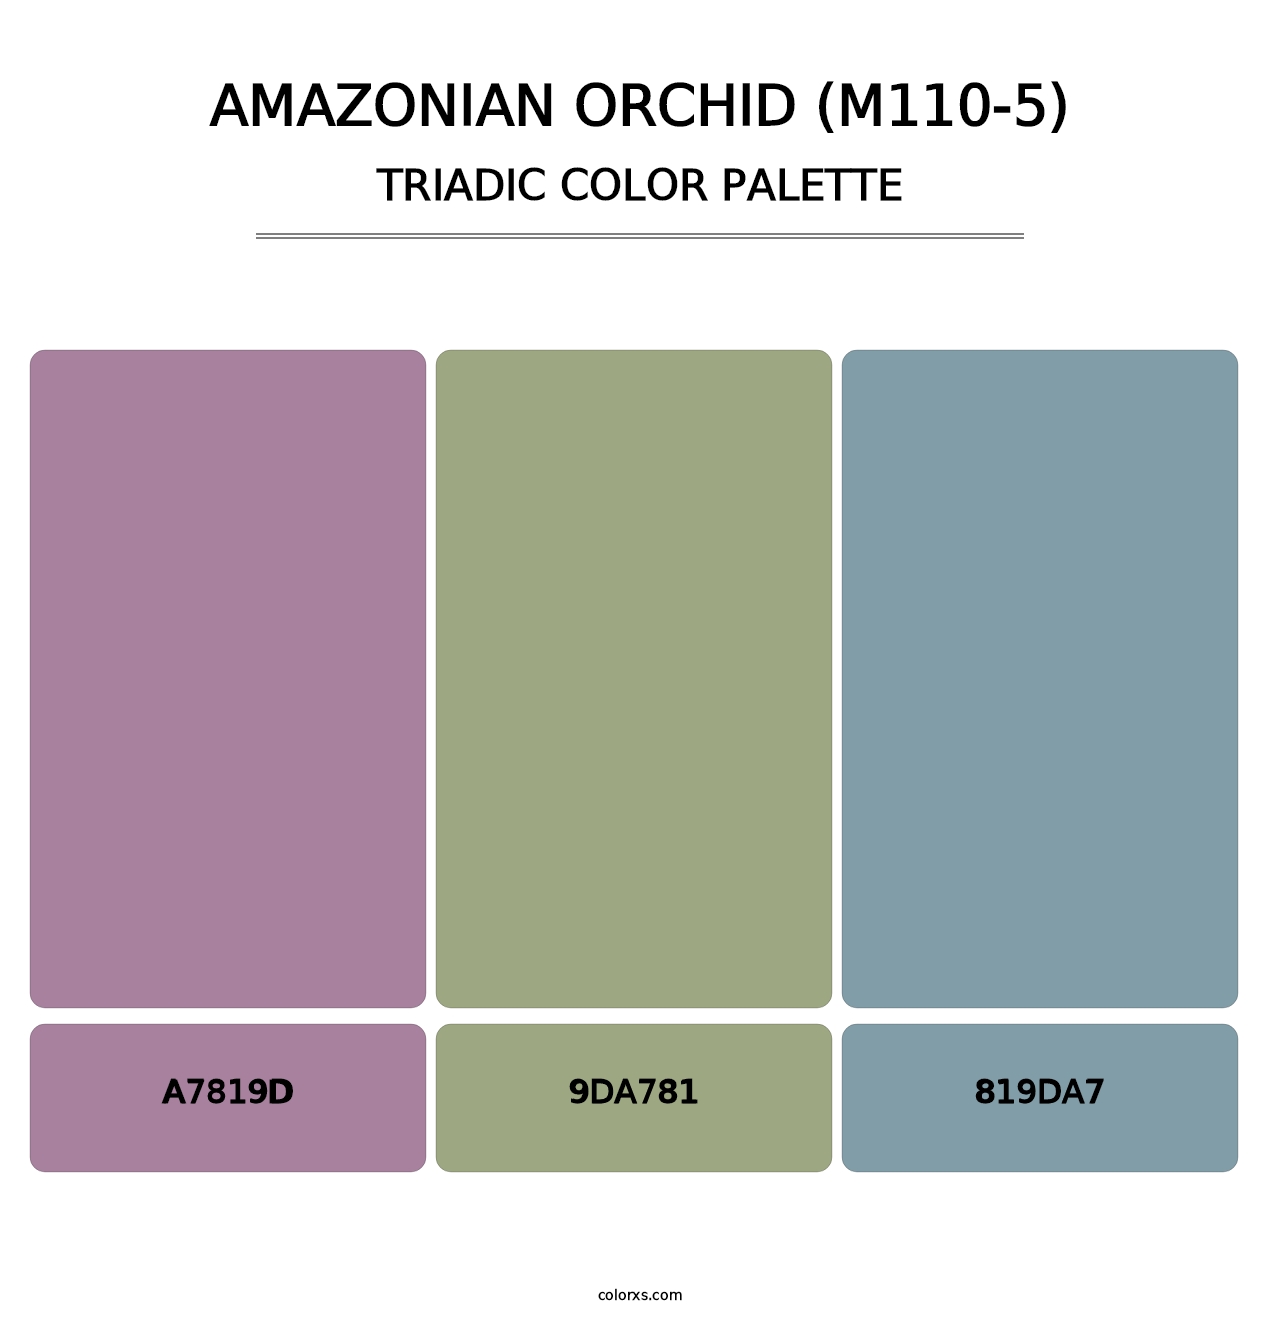 Amazonian Orchid (M110-5) - Triadic Color Palette